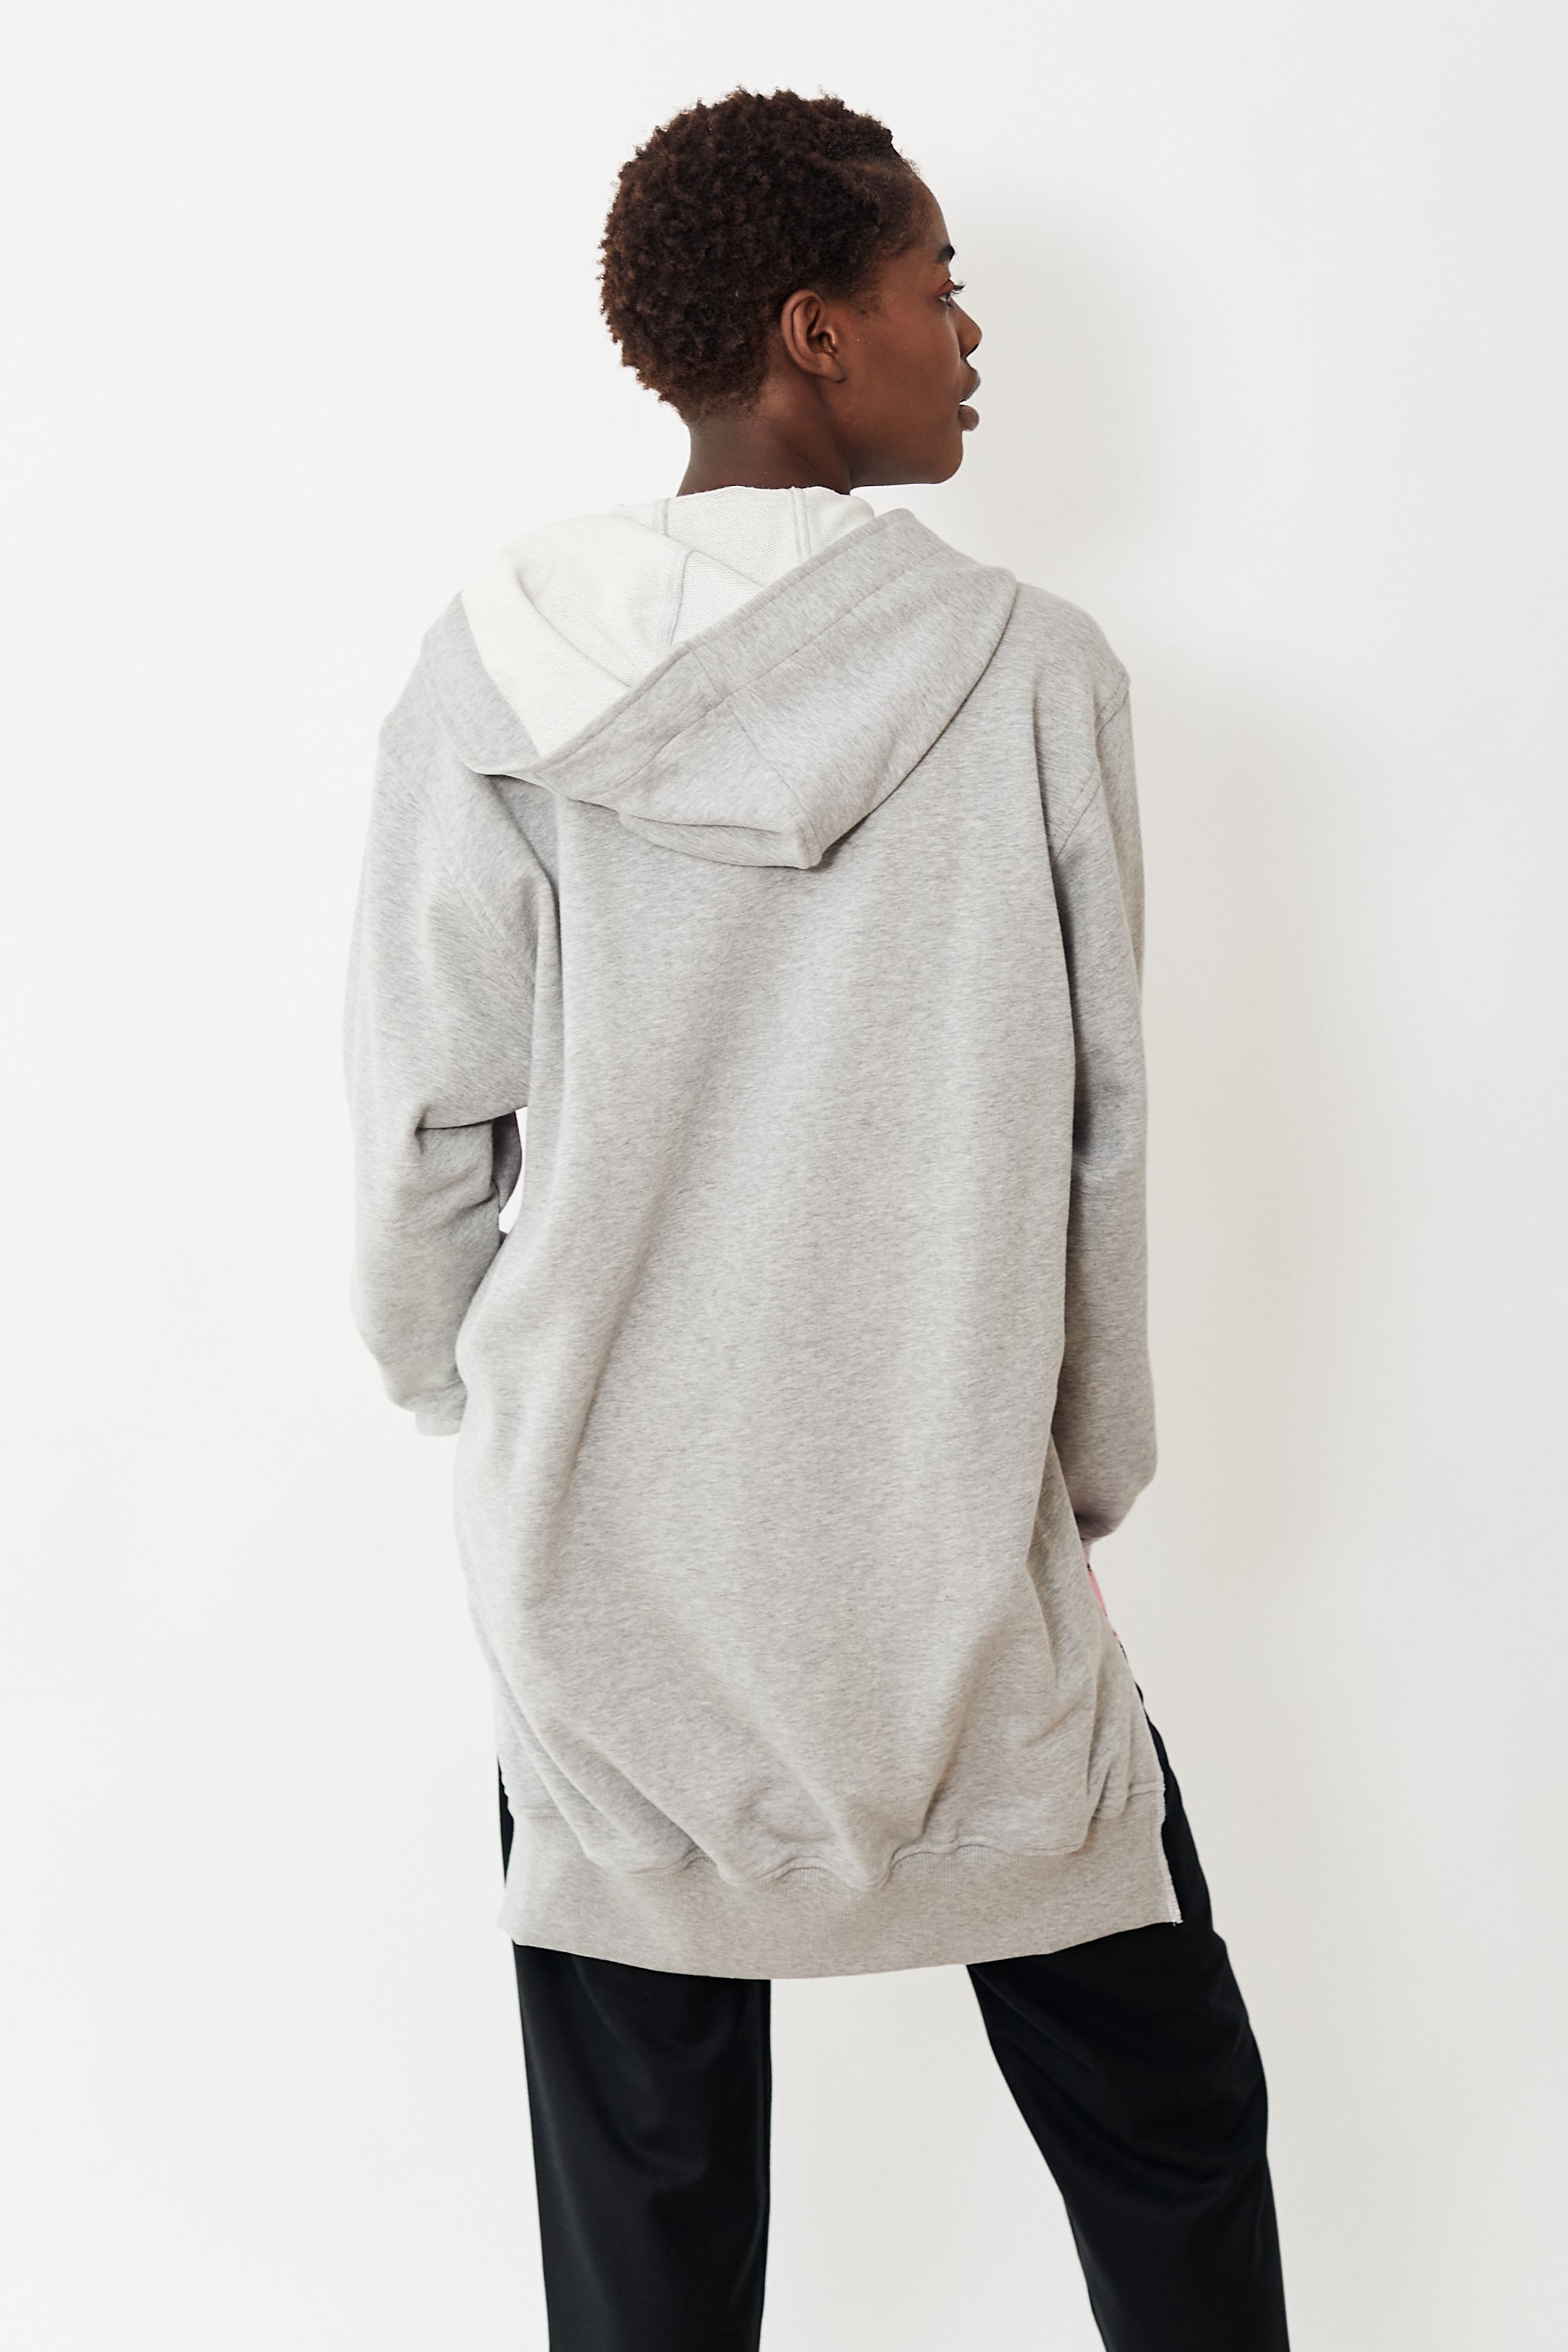 Comme des Gar ons Button Up Front Woven Hooded Sweatshirt Shirt